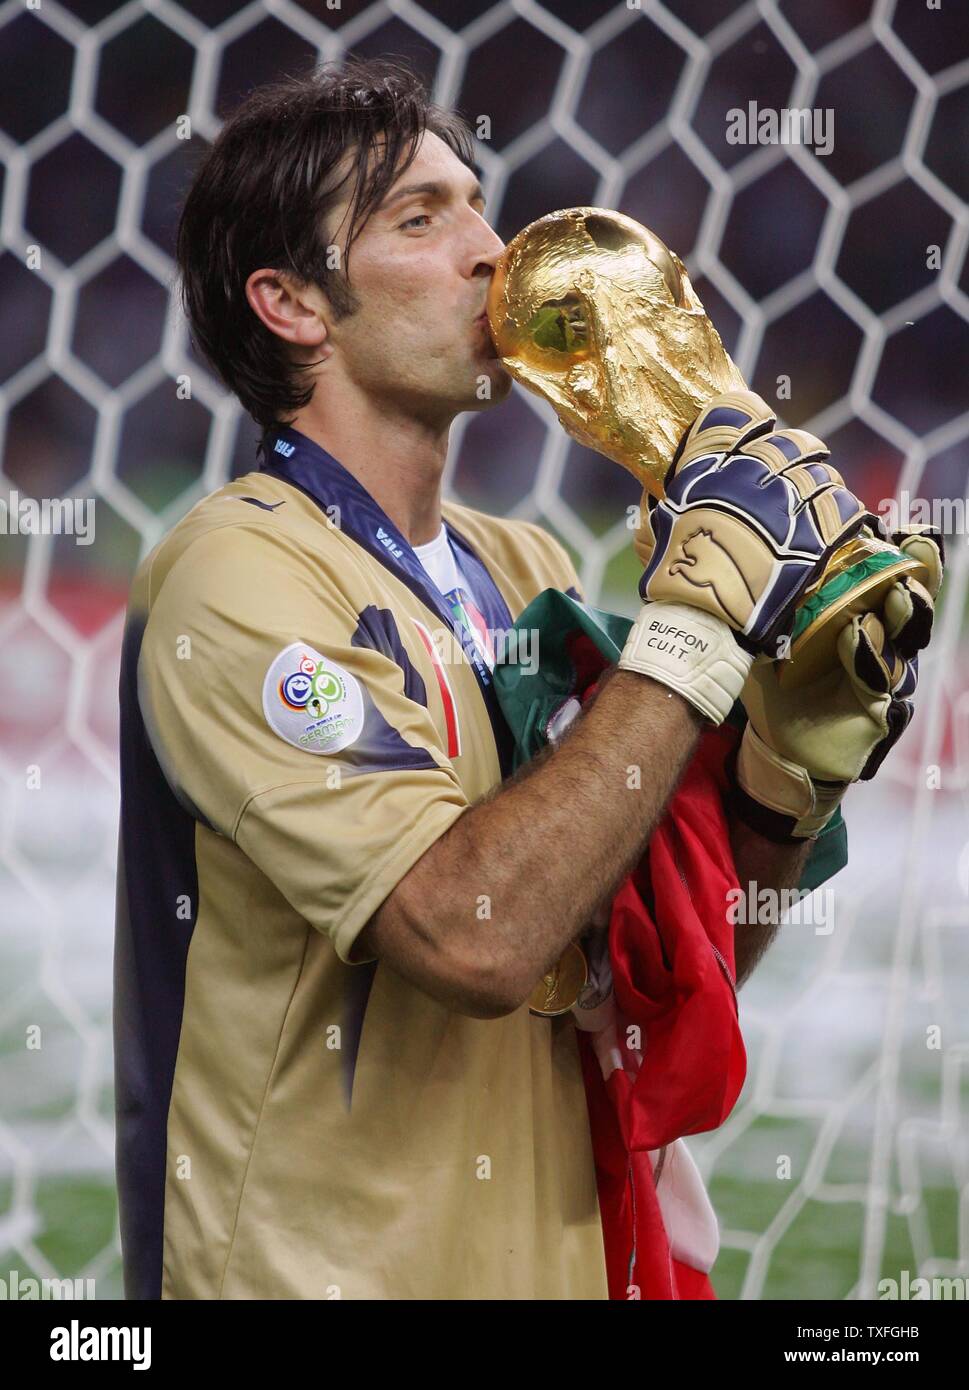 Italy's goalkeeper Gianluigi Buffon kisses the World Cup after the final of the FIFA World Cup and victory over France in Berlin on July 9, 2006. Italy won 5-3 in a penalty shoot out.  (UPI Photo/Christian Brunskill) Stock Photo